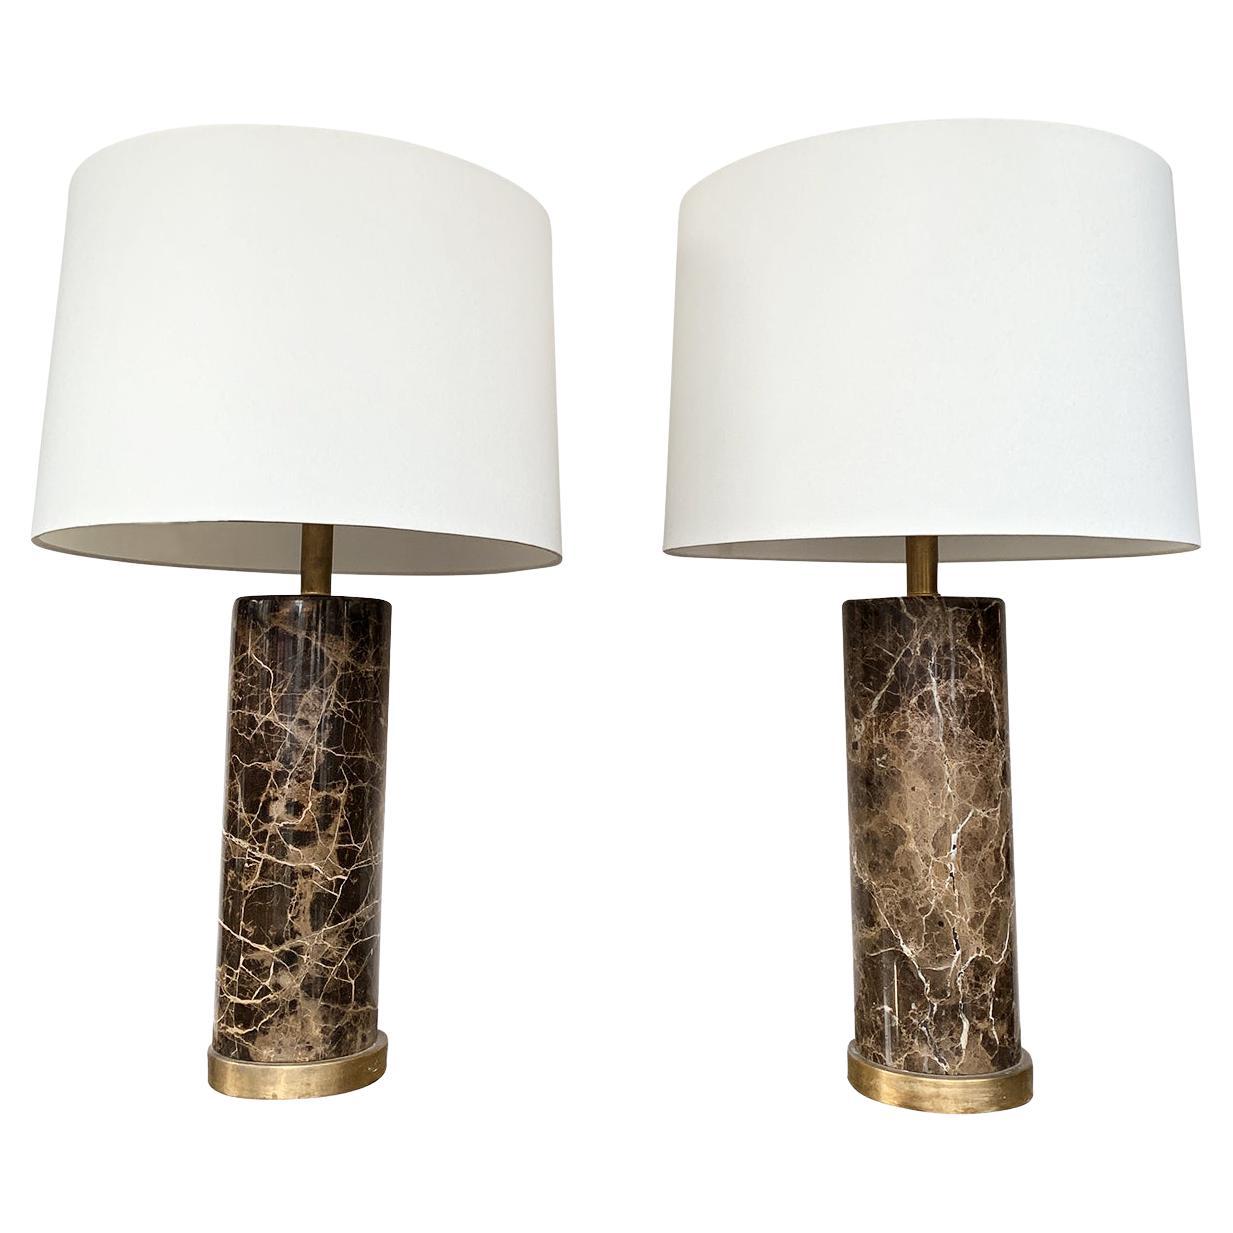 Pair of 1970s Italian Marble Table Lamps